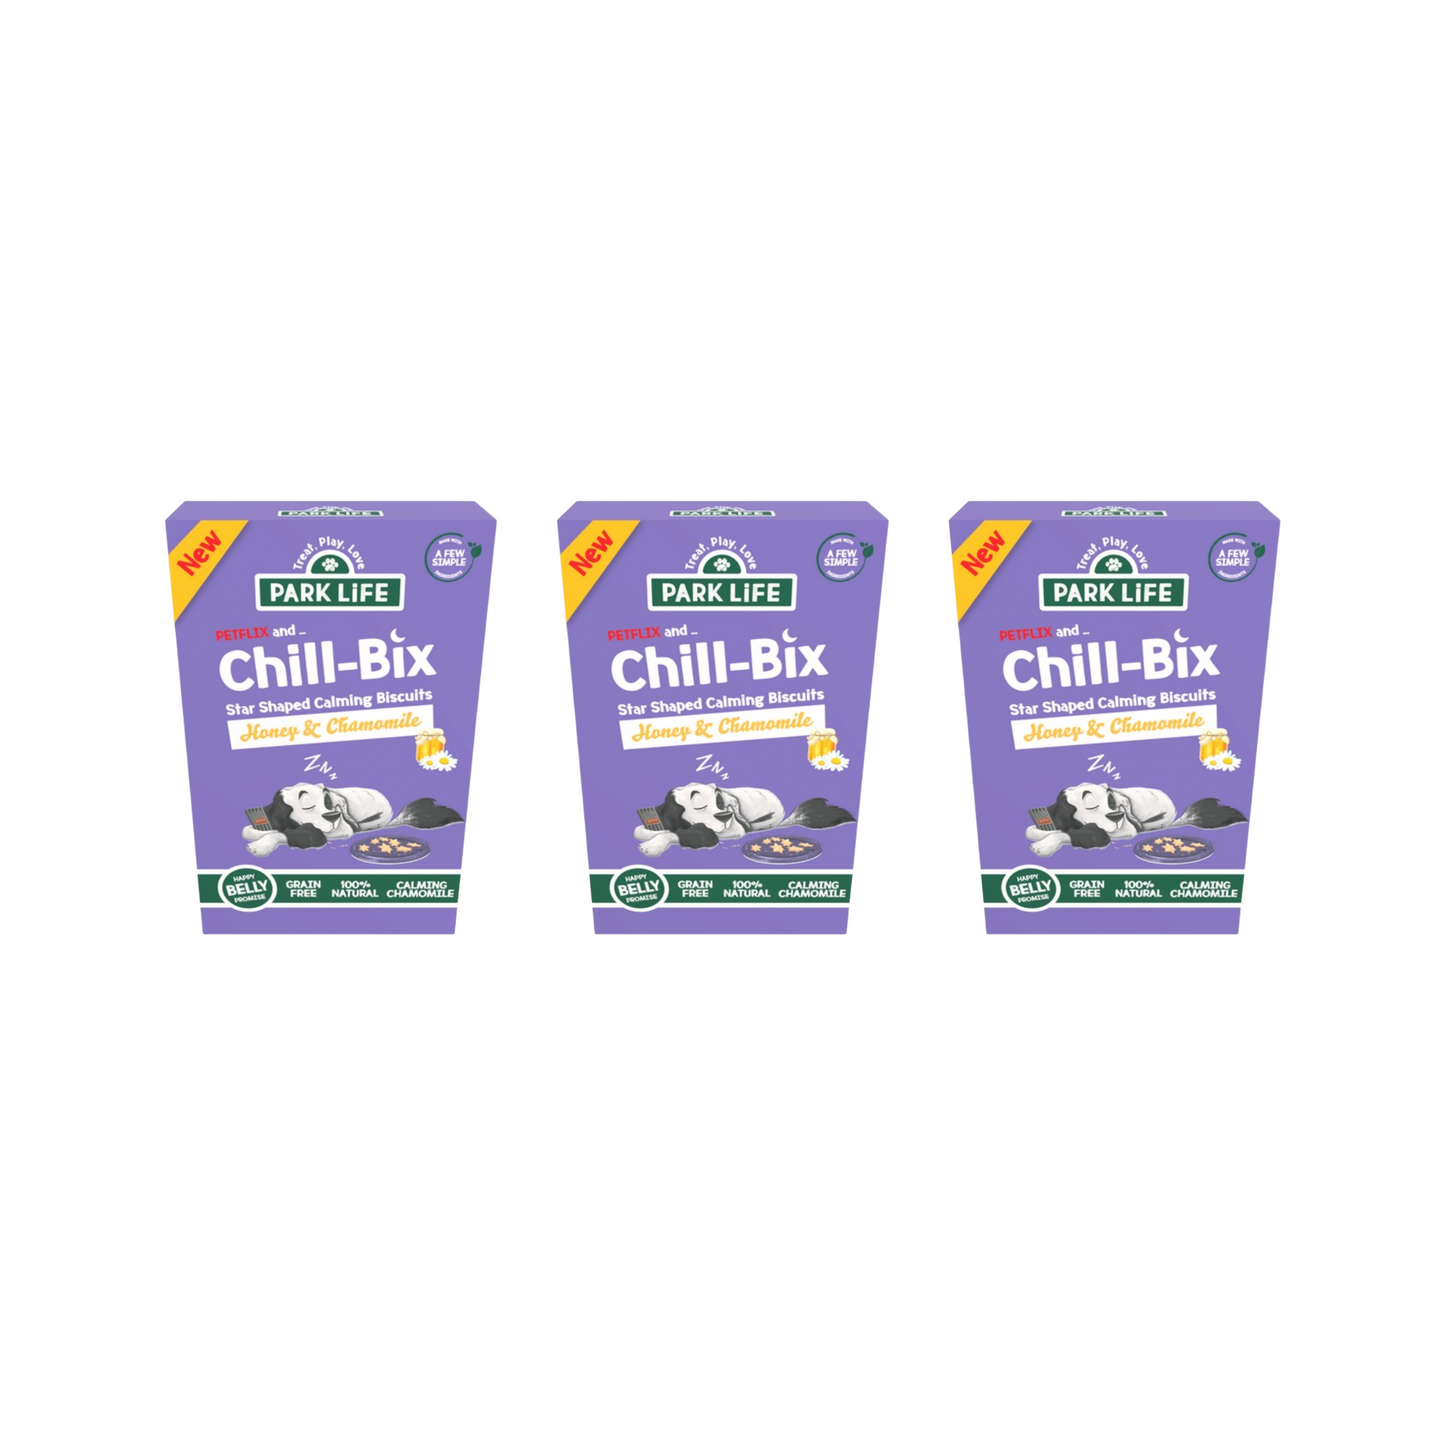 Park Life Chill-Bix Star Shaped Dog Calming Biscuits With Honey & Chamomile 300g